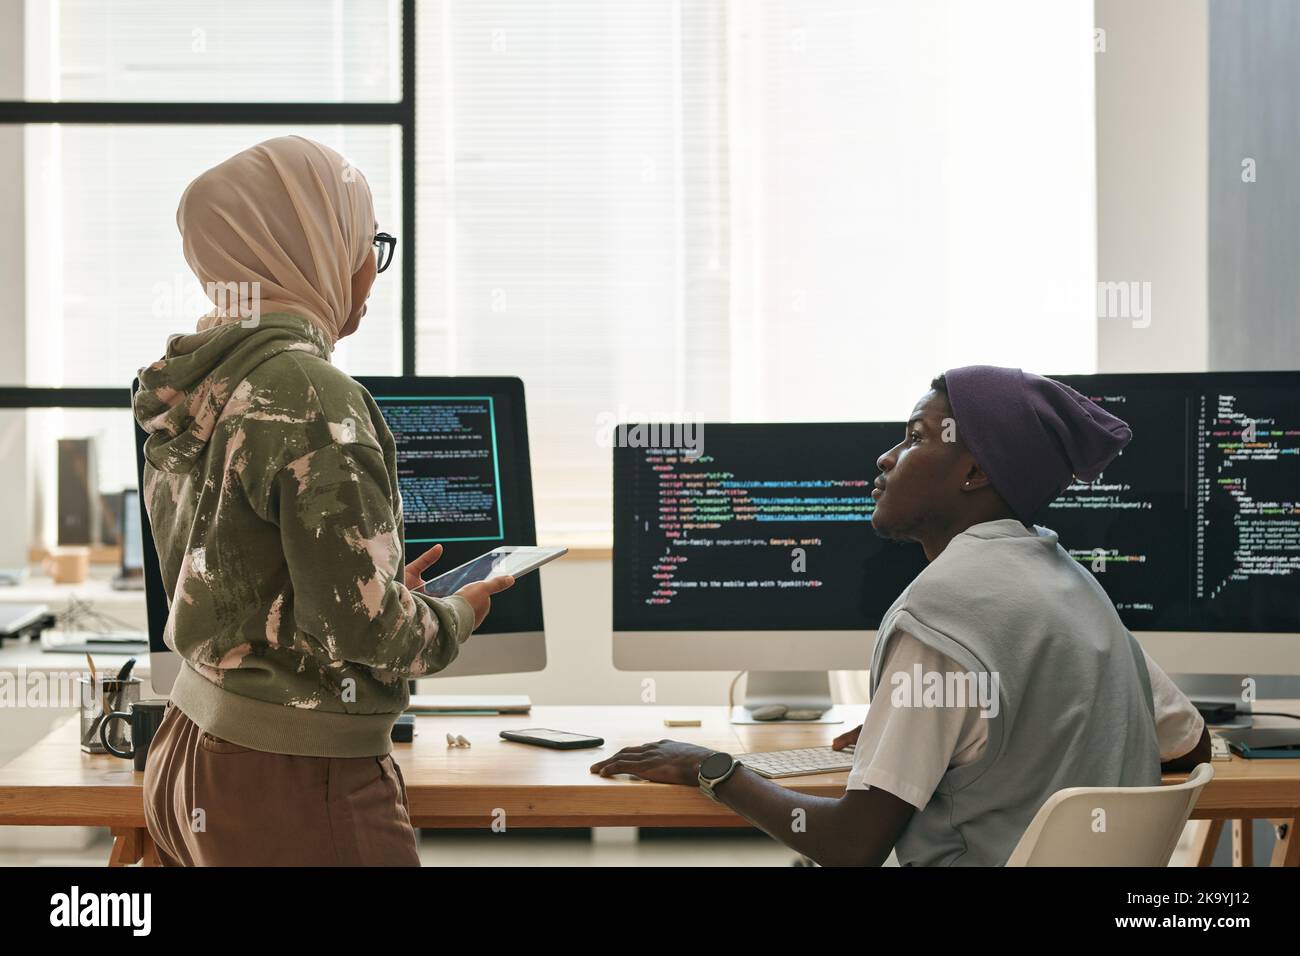 Two young intercultural IT engineers discussing ways of decoding data while Muslim woman in hijab standing in front of computer screens Stock Photo